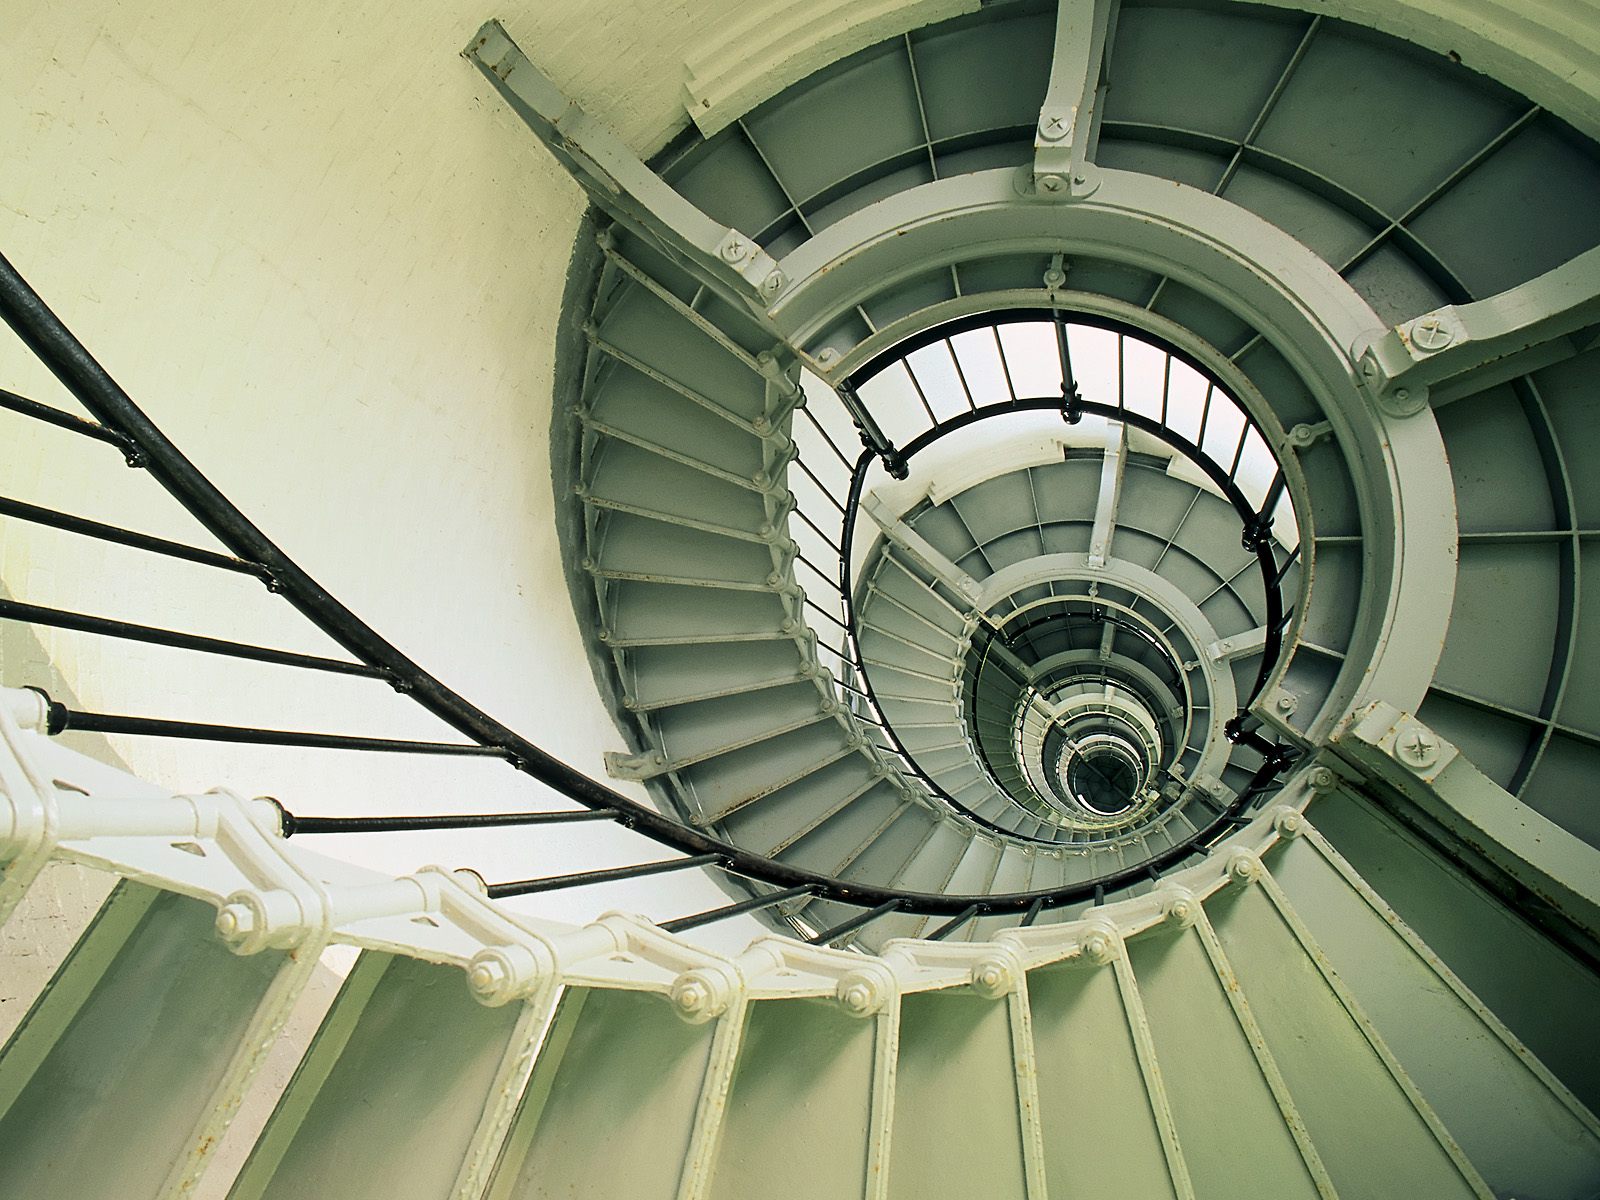 Spiral staircase in high definition.